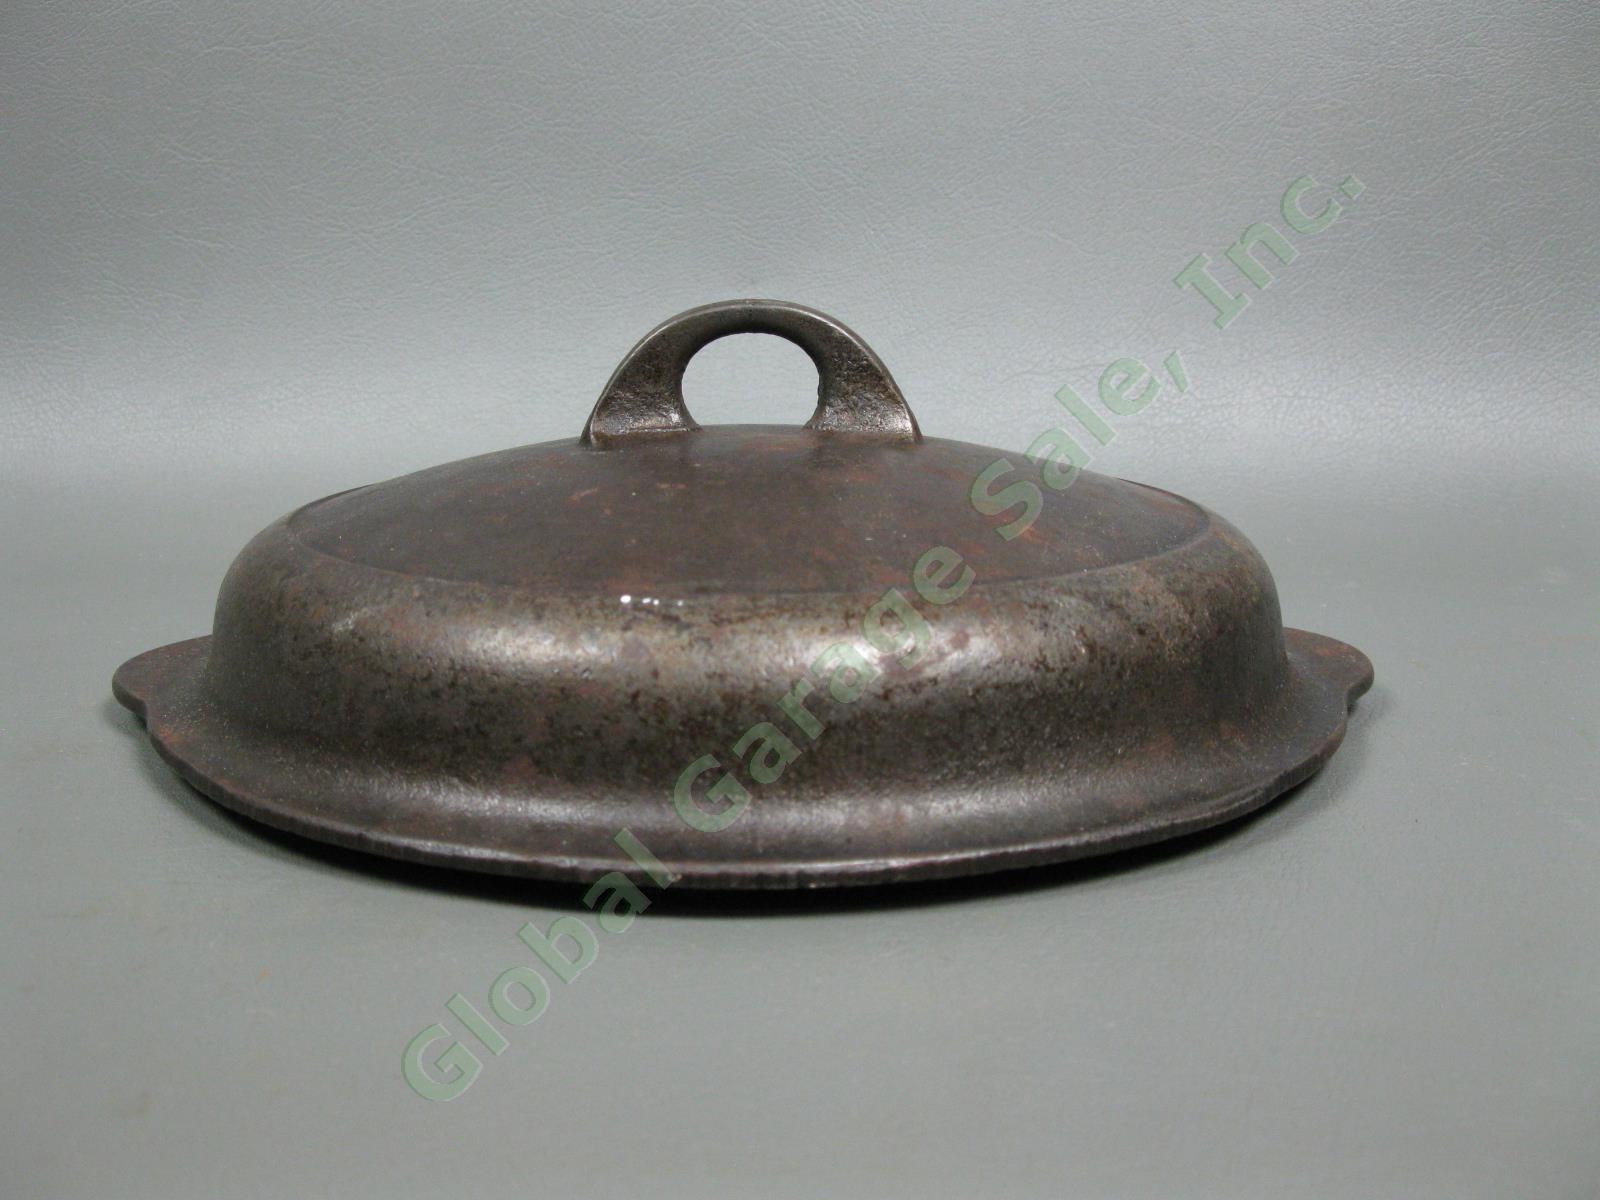 Vintage Griswold No-5 1095 Cast Iron Self-Basting Dutch Oven Lid Cover Cookware 3